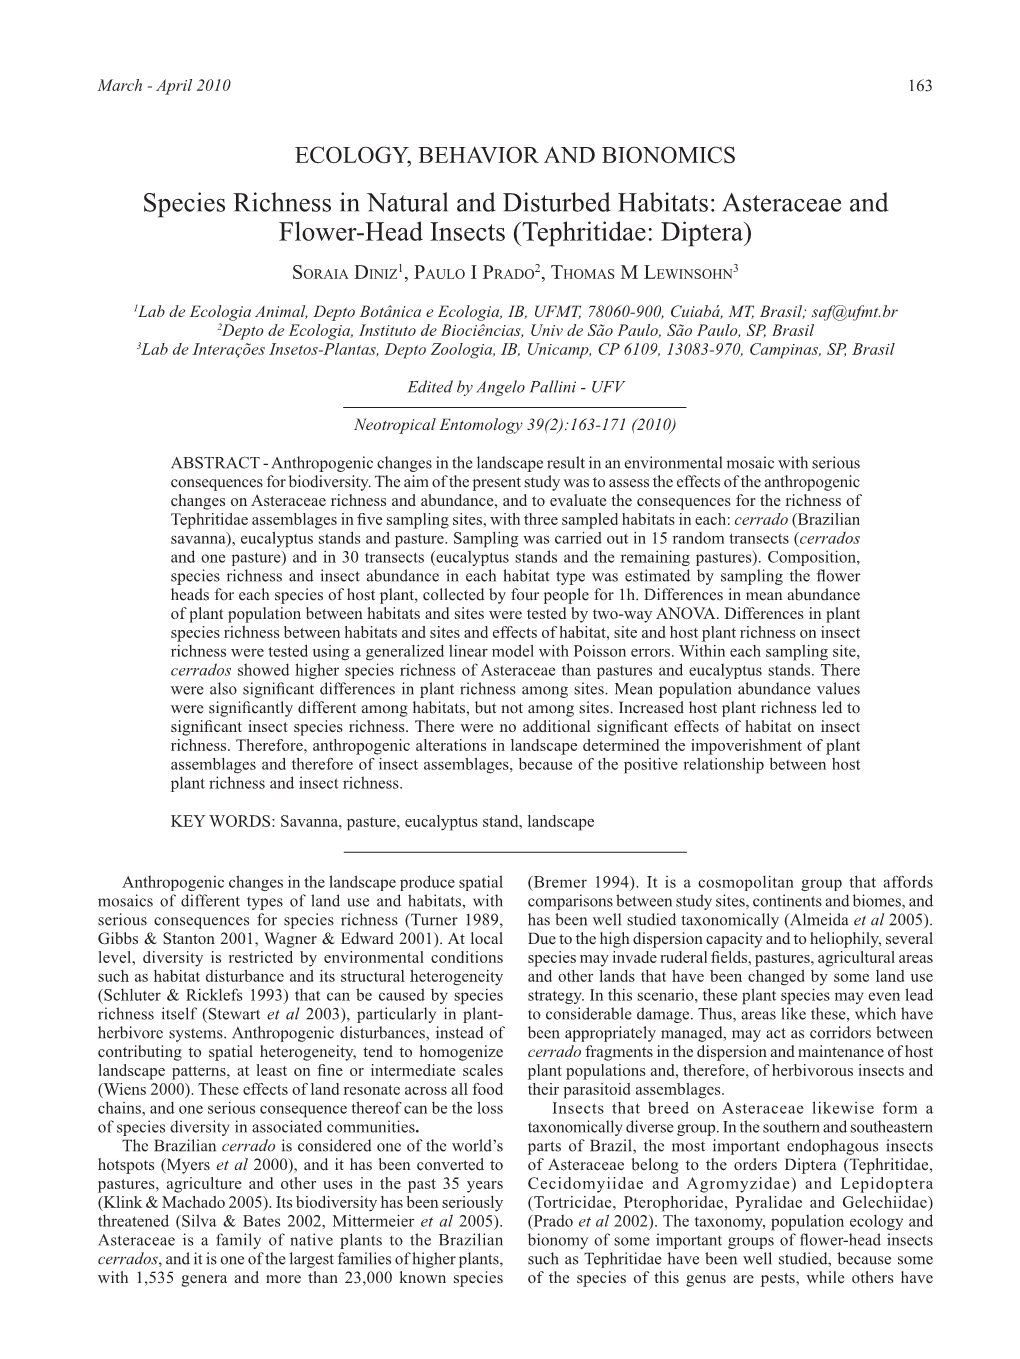 Species Richness in Natural and Disturbed Habitats: Asteraceae and Flower-Head Insects (Tephritidae: Diptera)